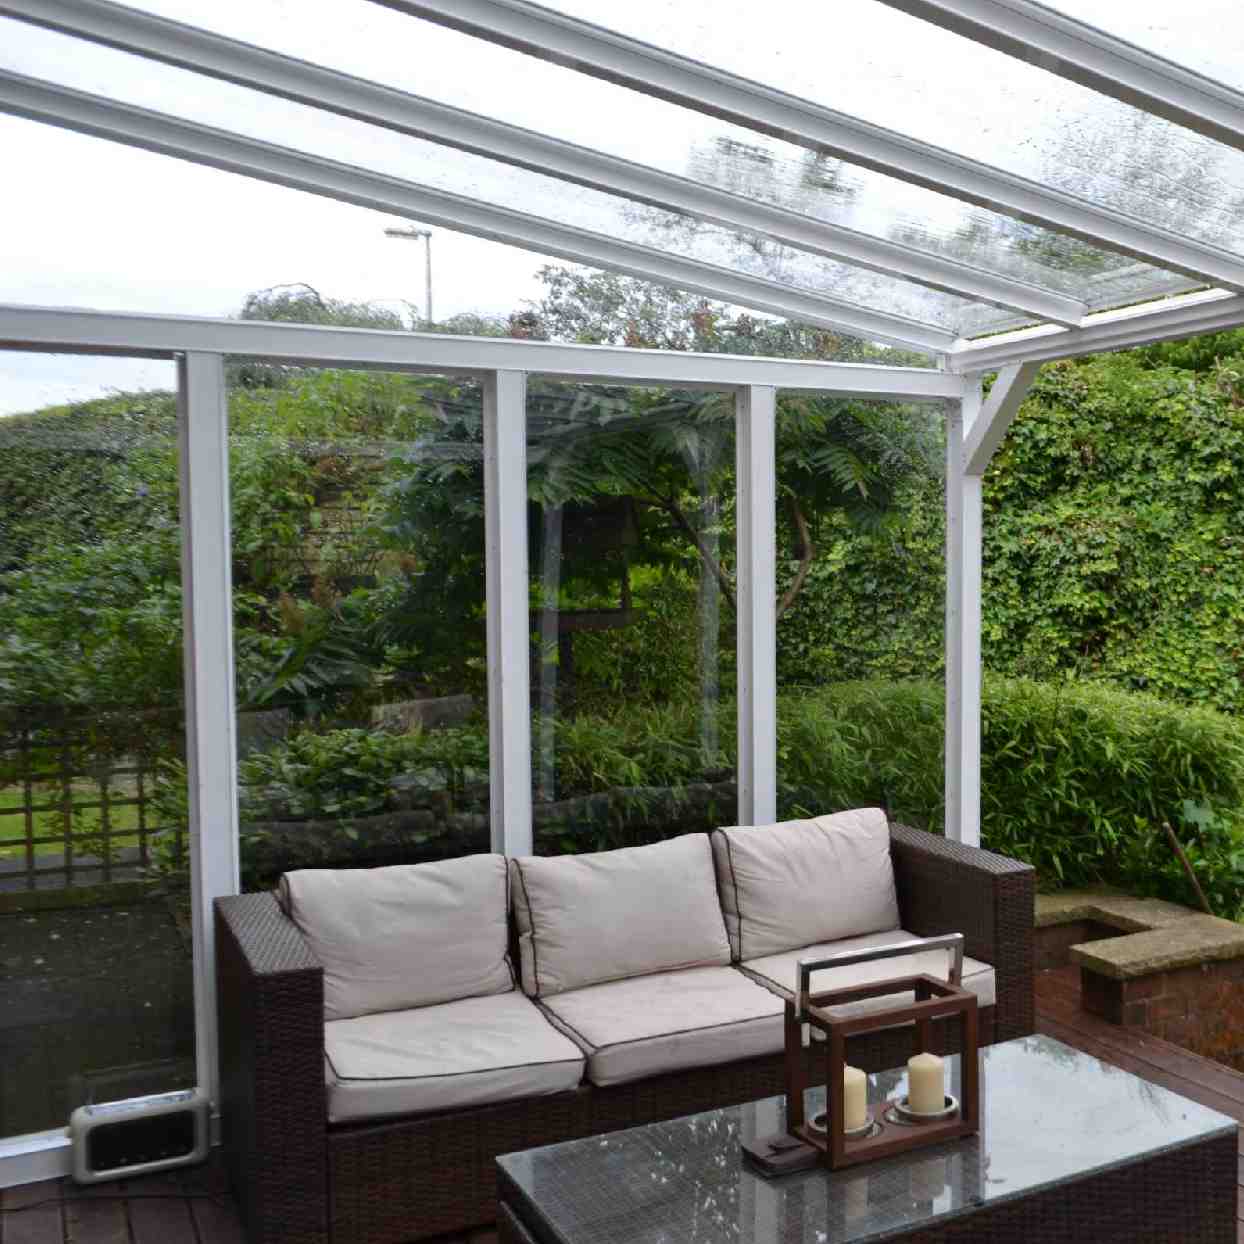 Buy Omega Verandah White with 6mm Glass Clear Plate Polycarbonate Glazing - 5.6m (W) x 3.0m (P), (3) Supporting Posts online today